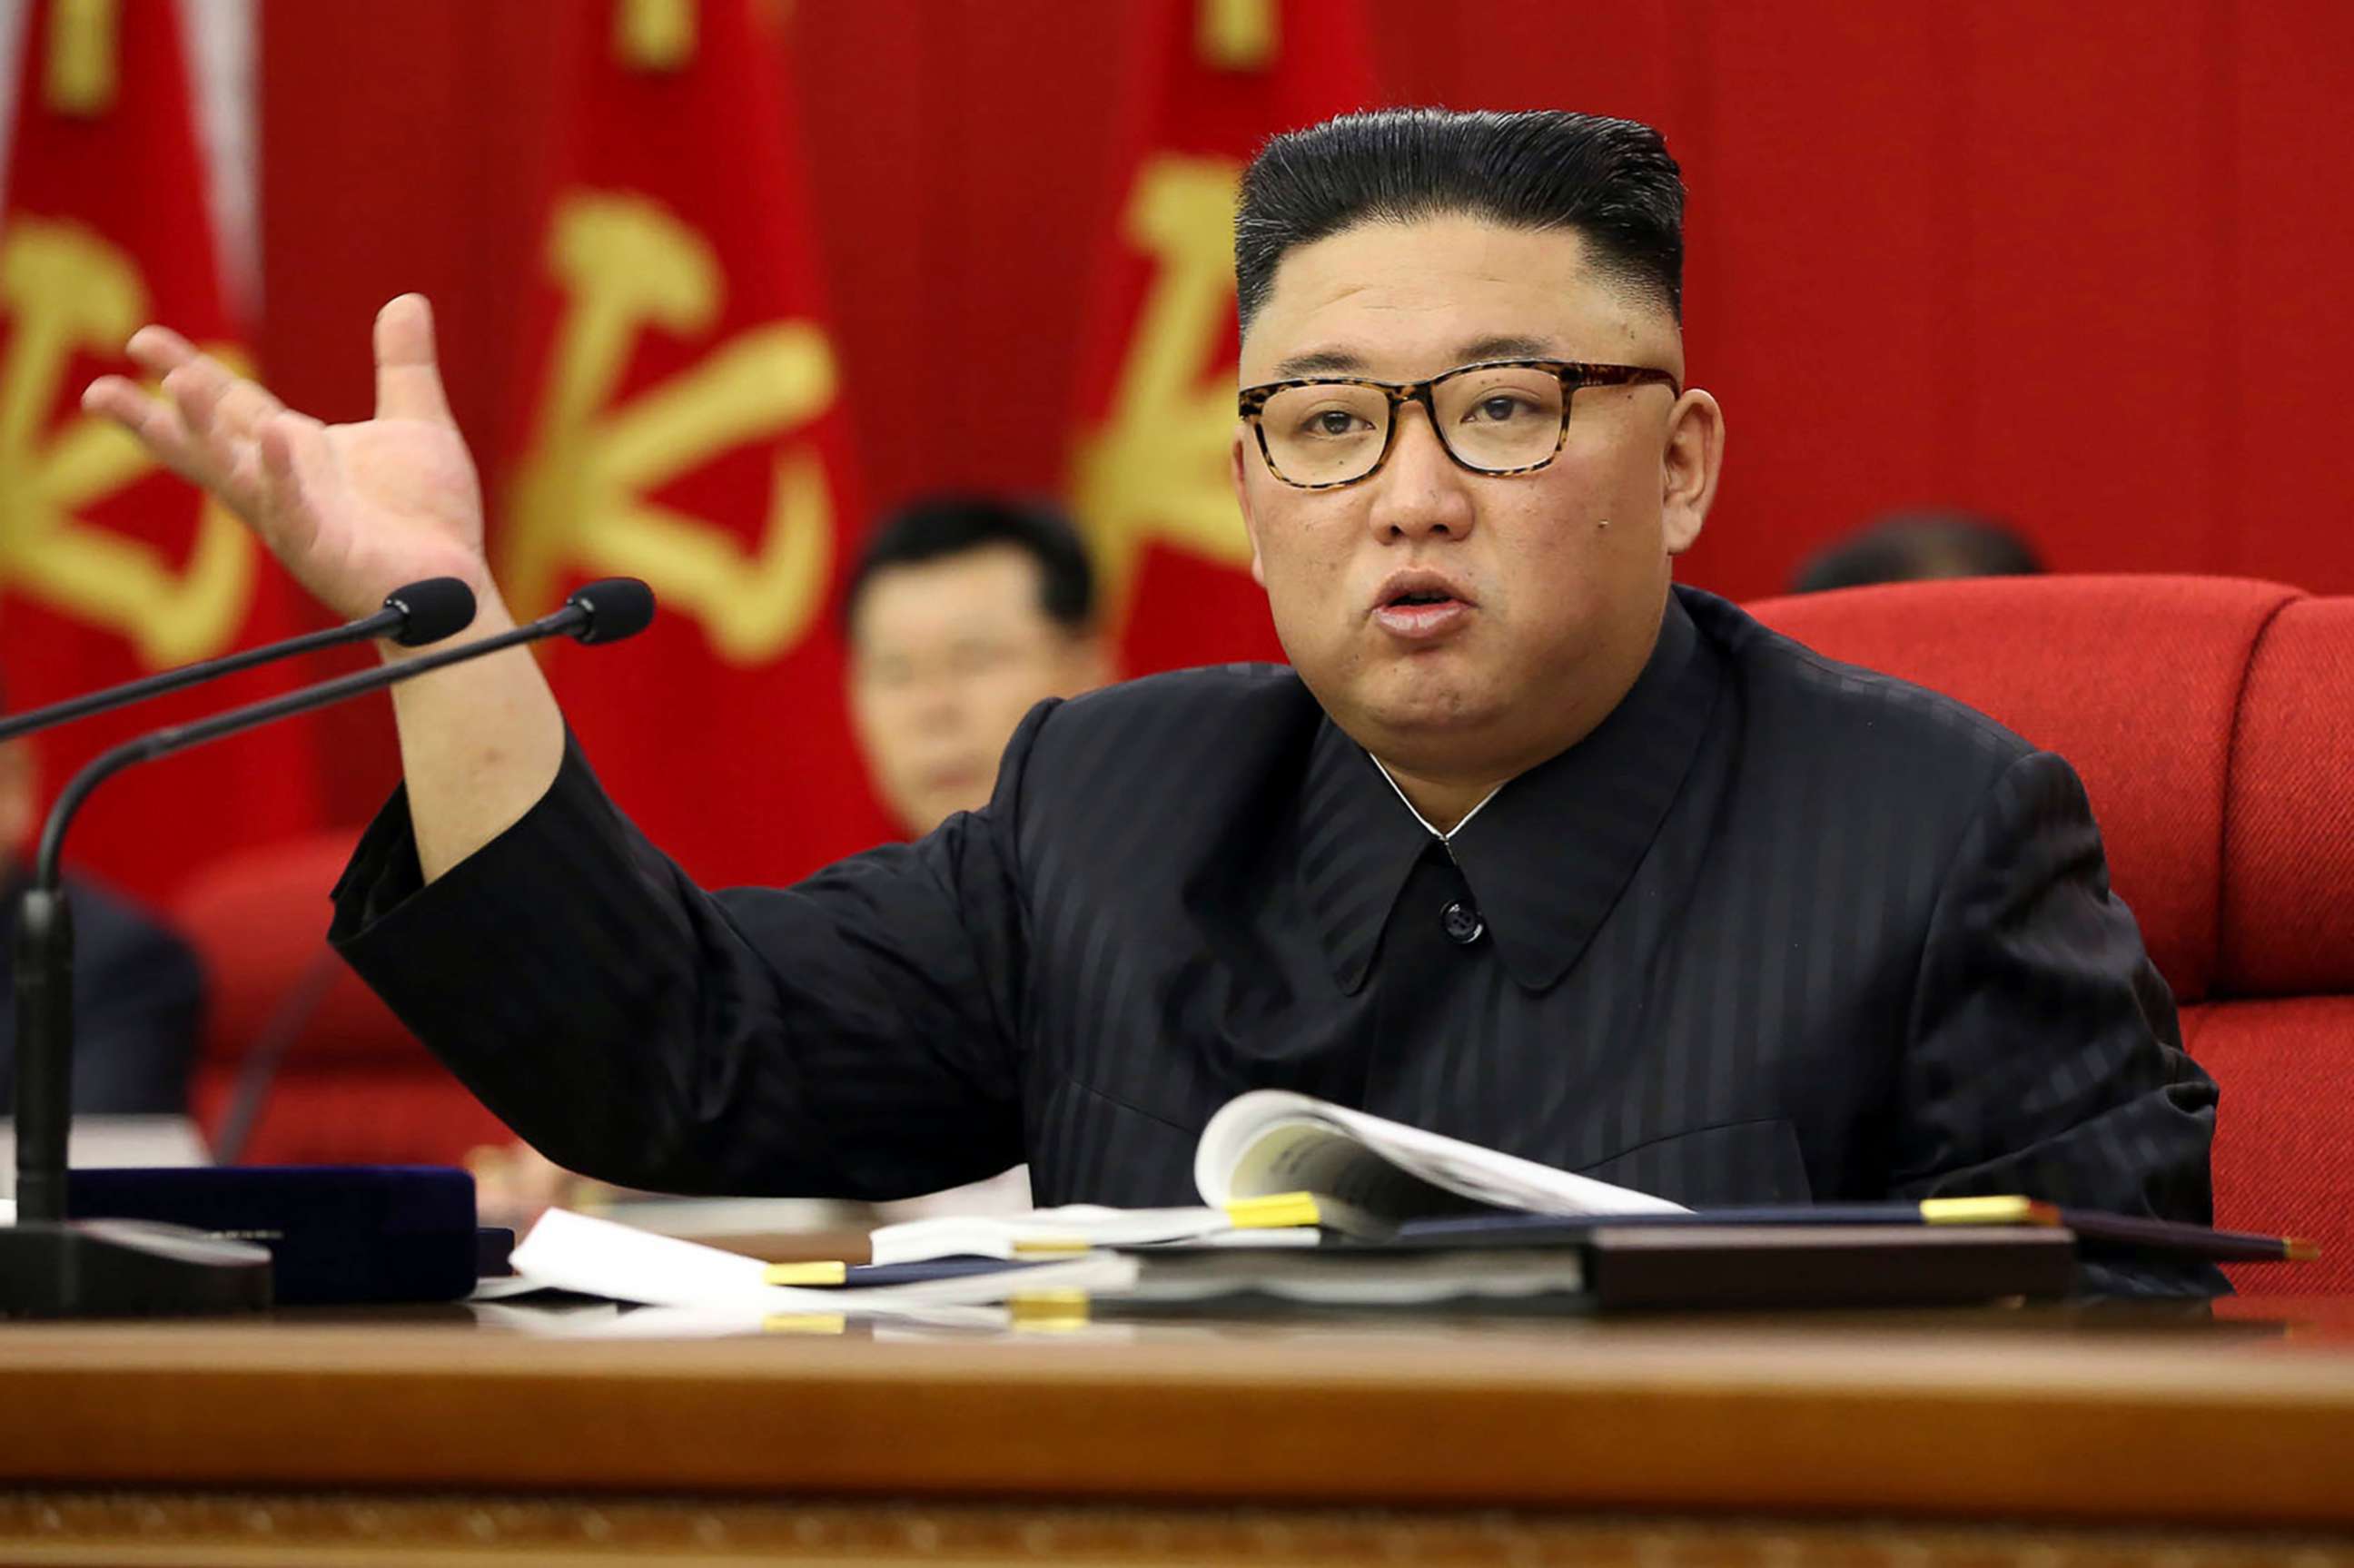 PHOTO: In this photo provided by the North Korean government, North Korean leader Kim Jong Un speaks during a Workers' Party meeting in Pyongyang, North Korea, Tuesday, June 15, 2021. 